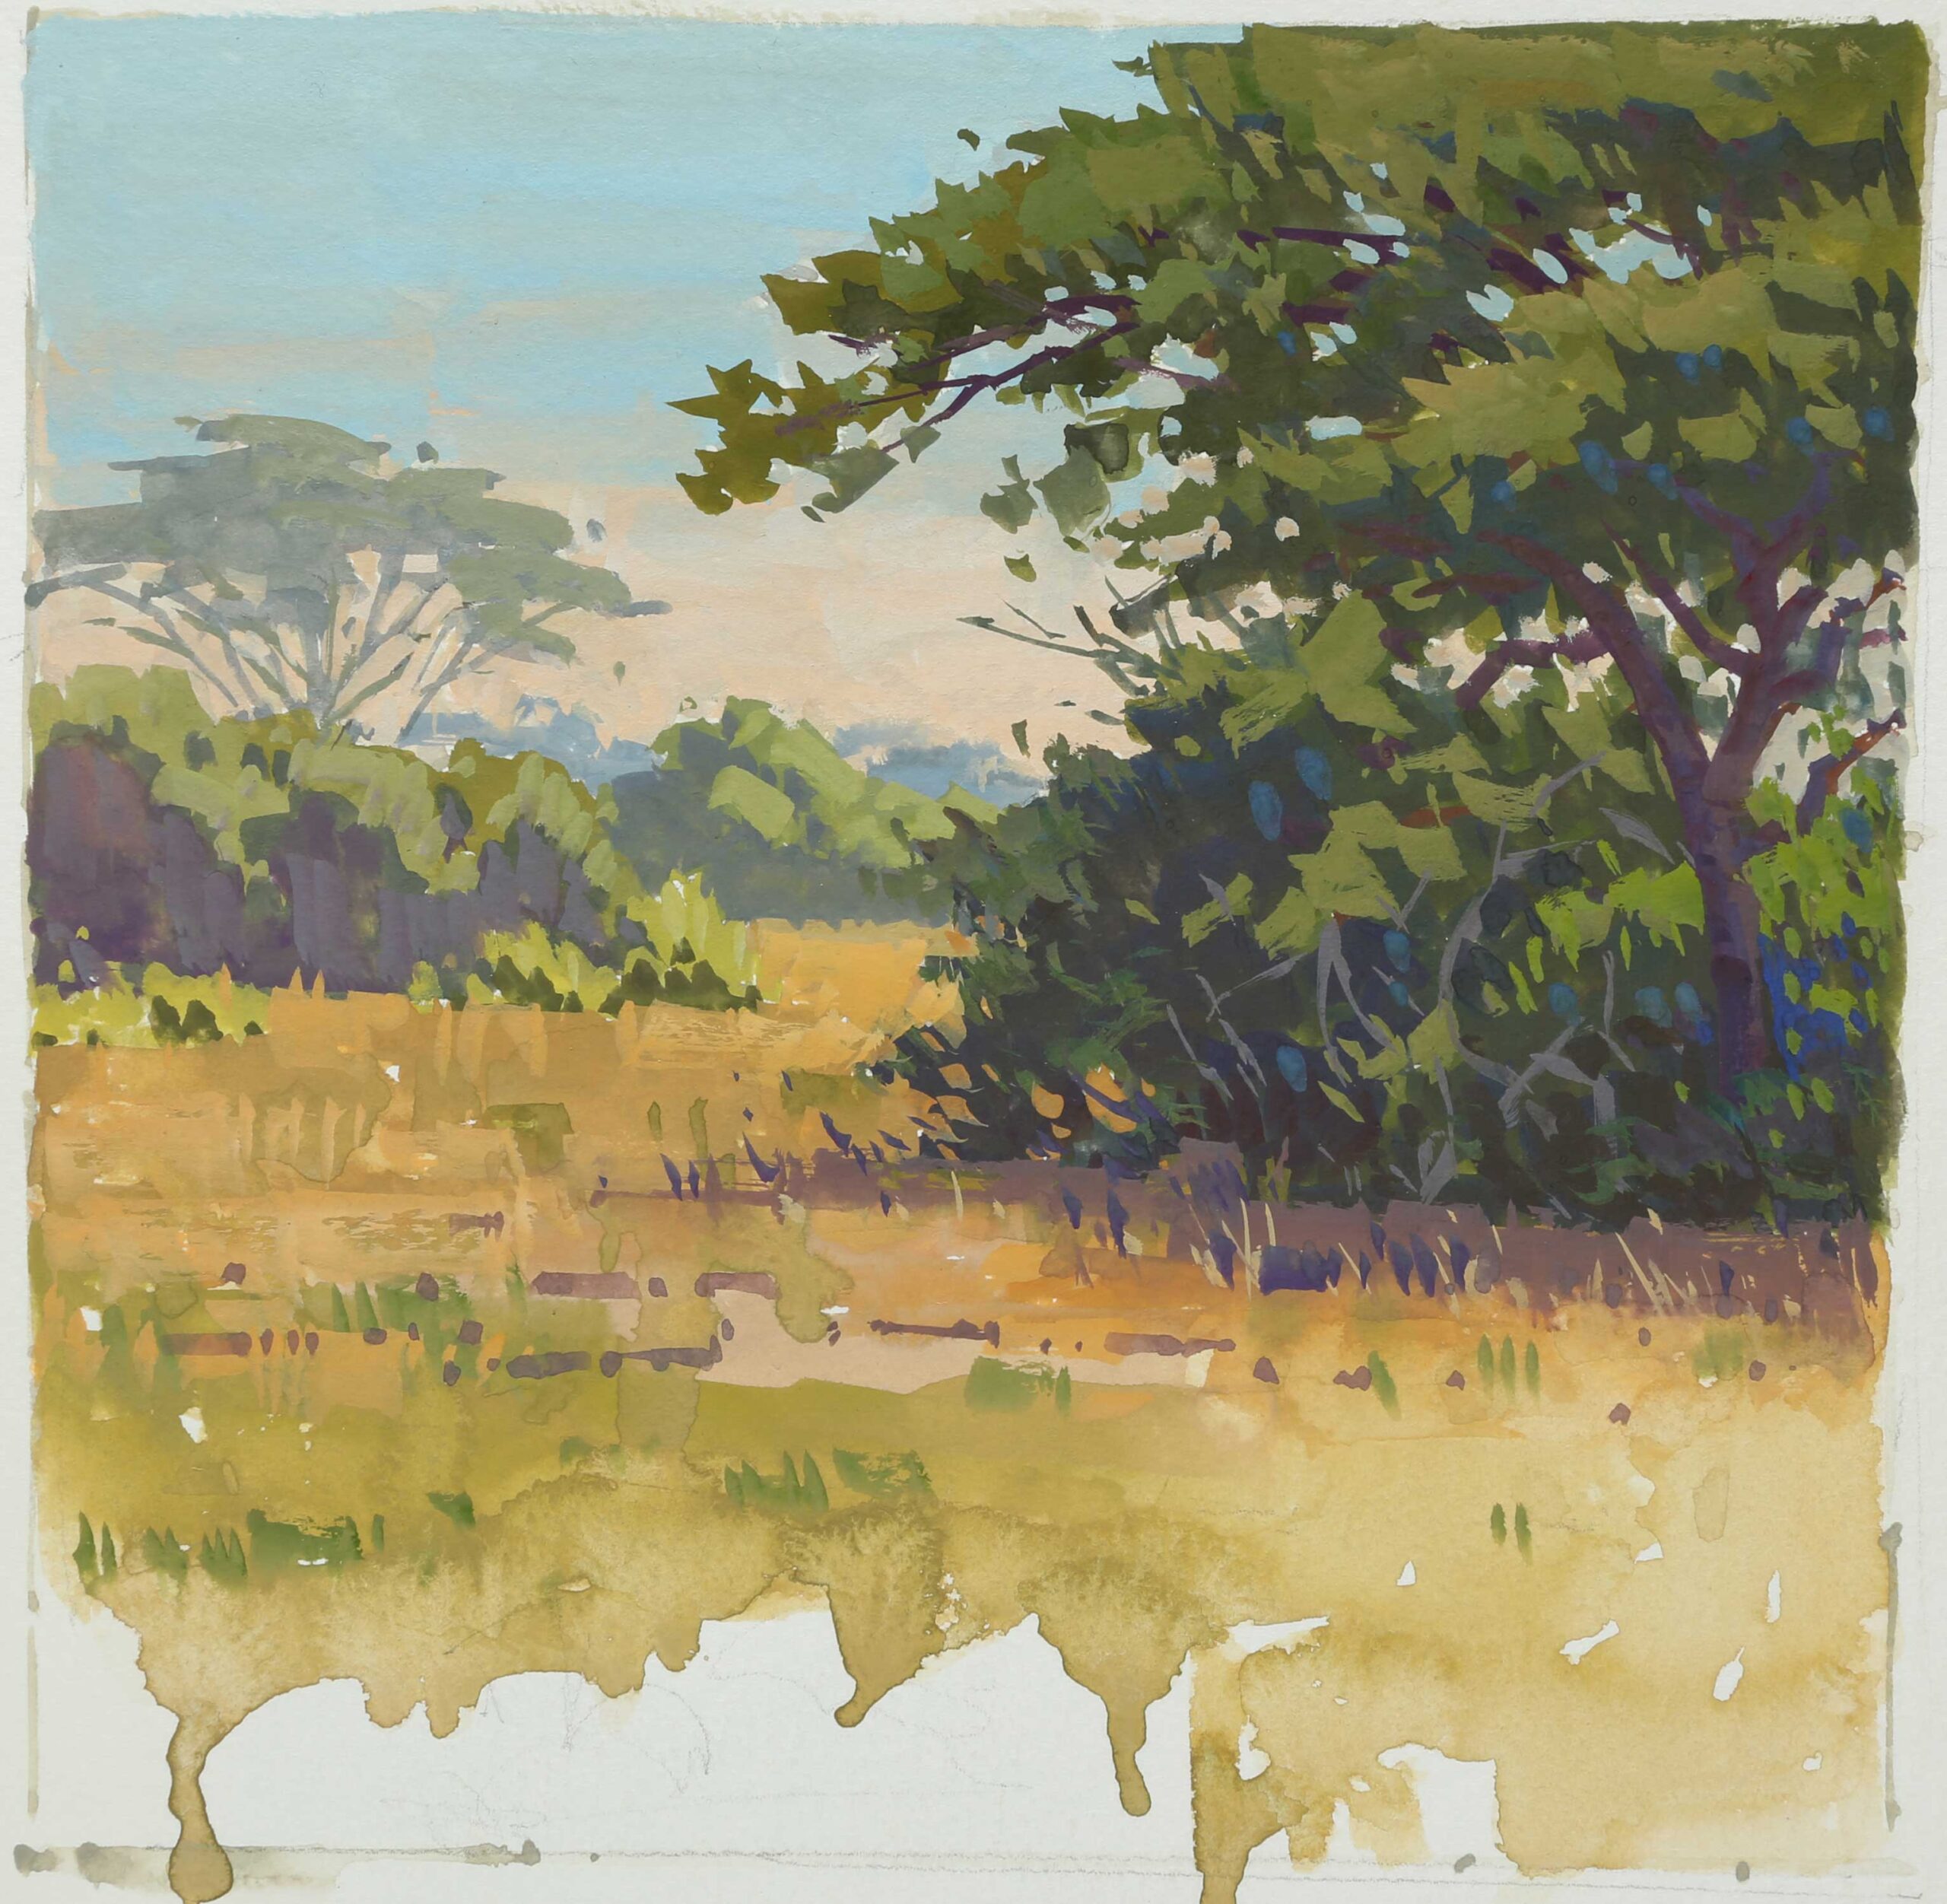 Paul Kratter, "Waning Shade," 2019, gouache, 7 x 7 in., collection the artist, plein air